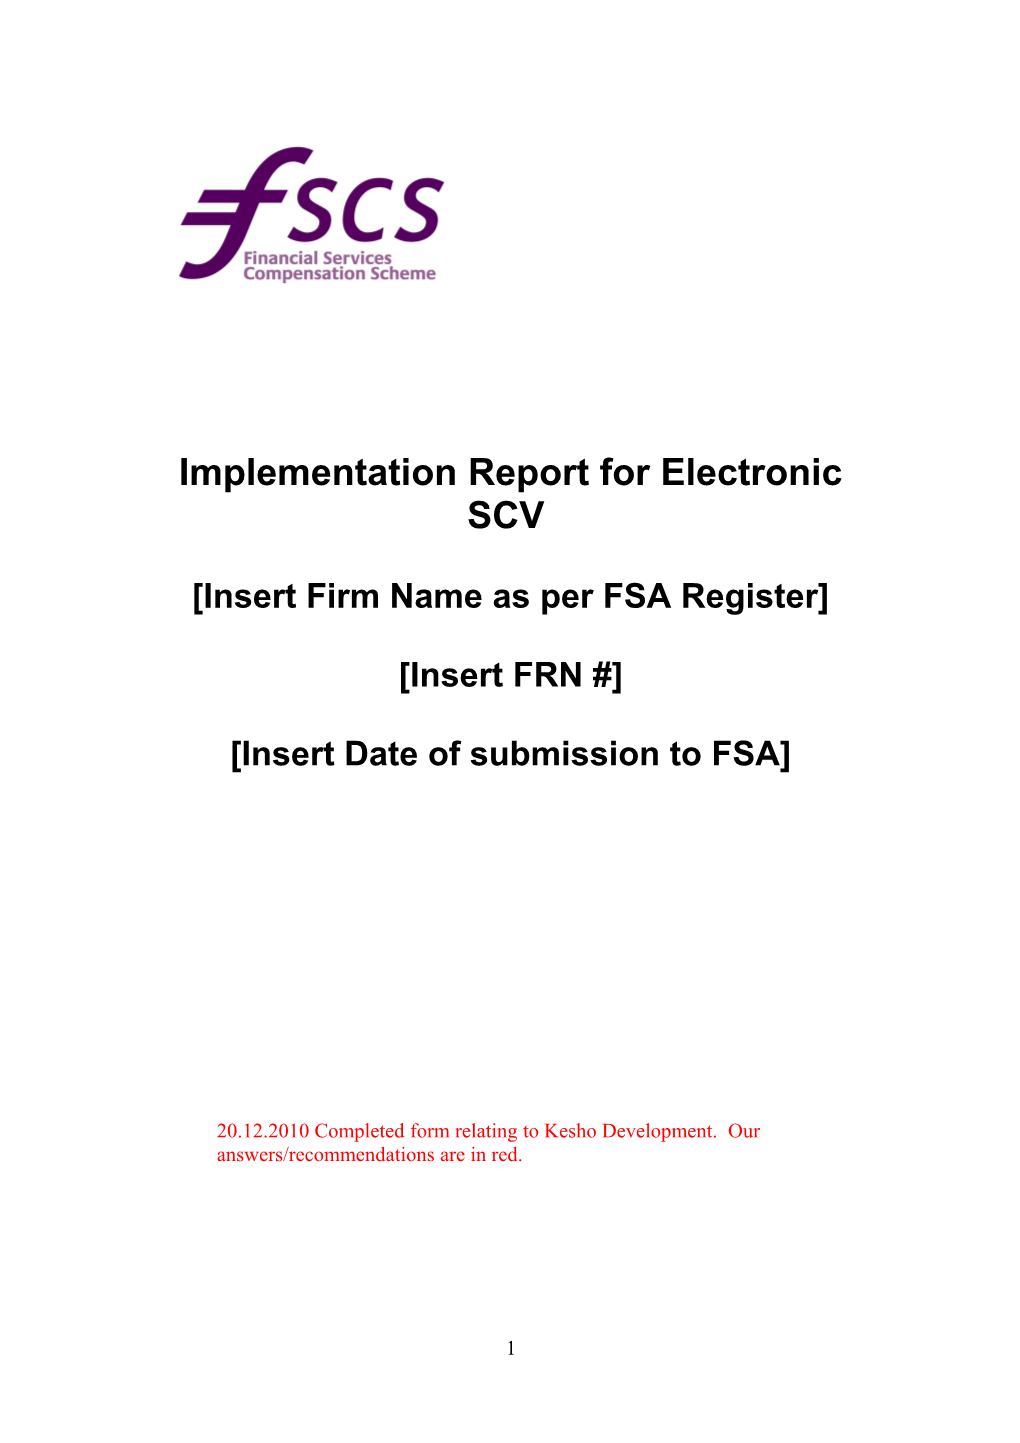 Implementation Report for Electronic SCV